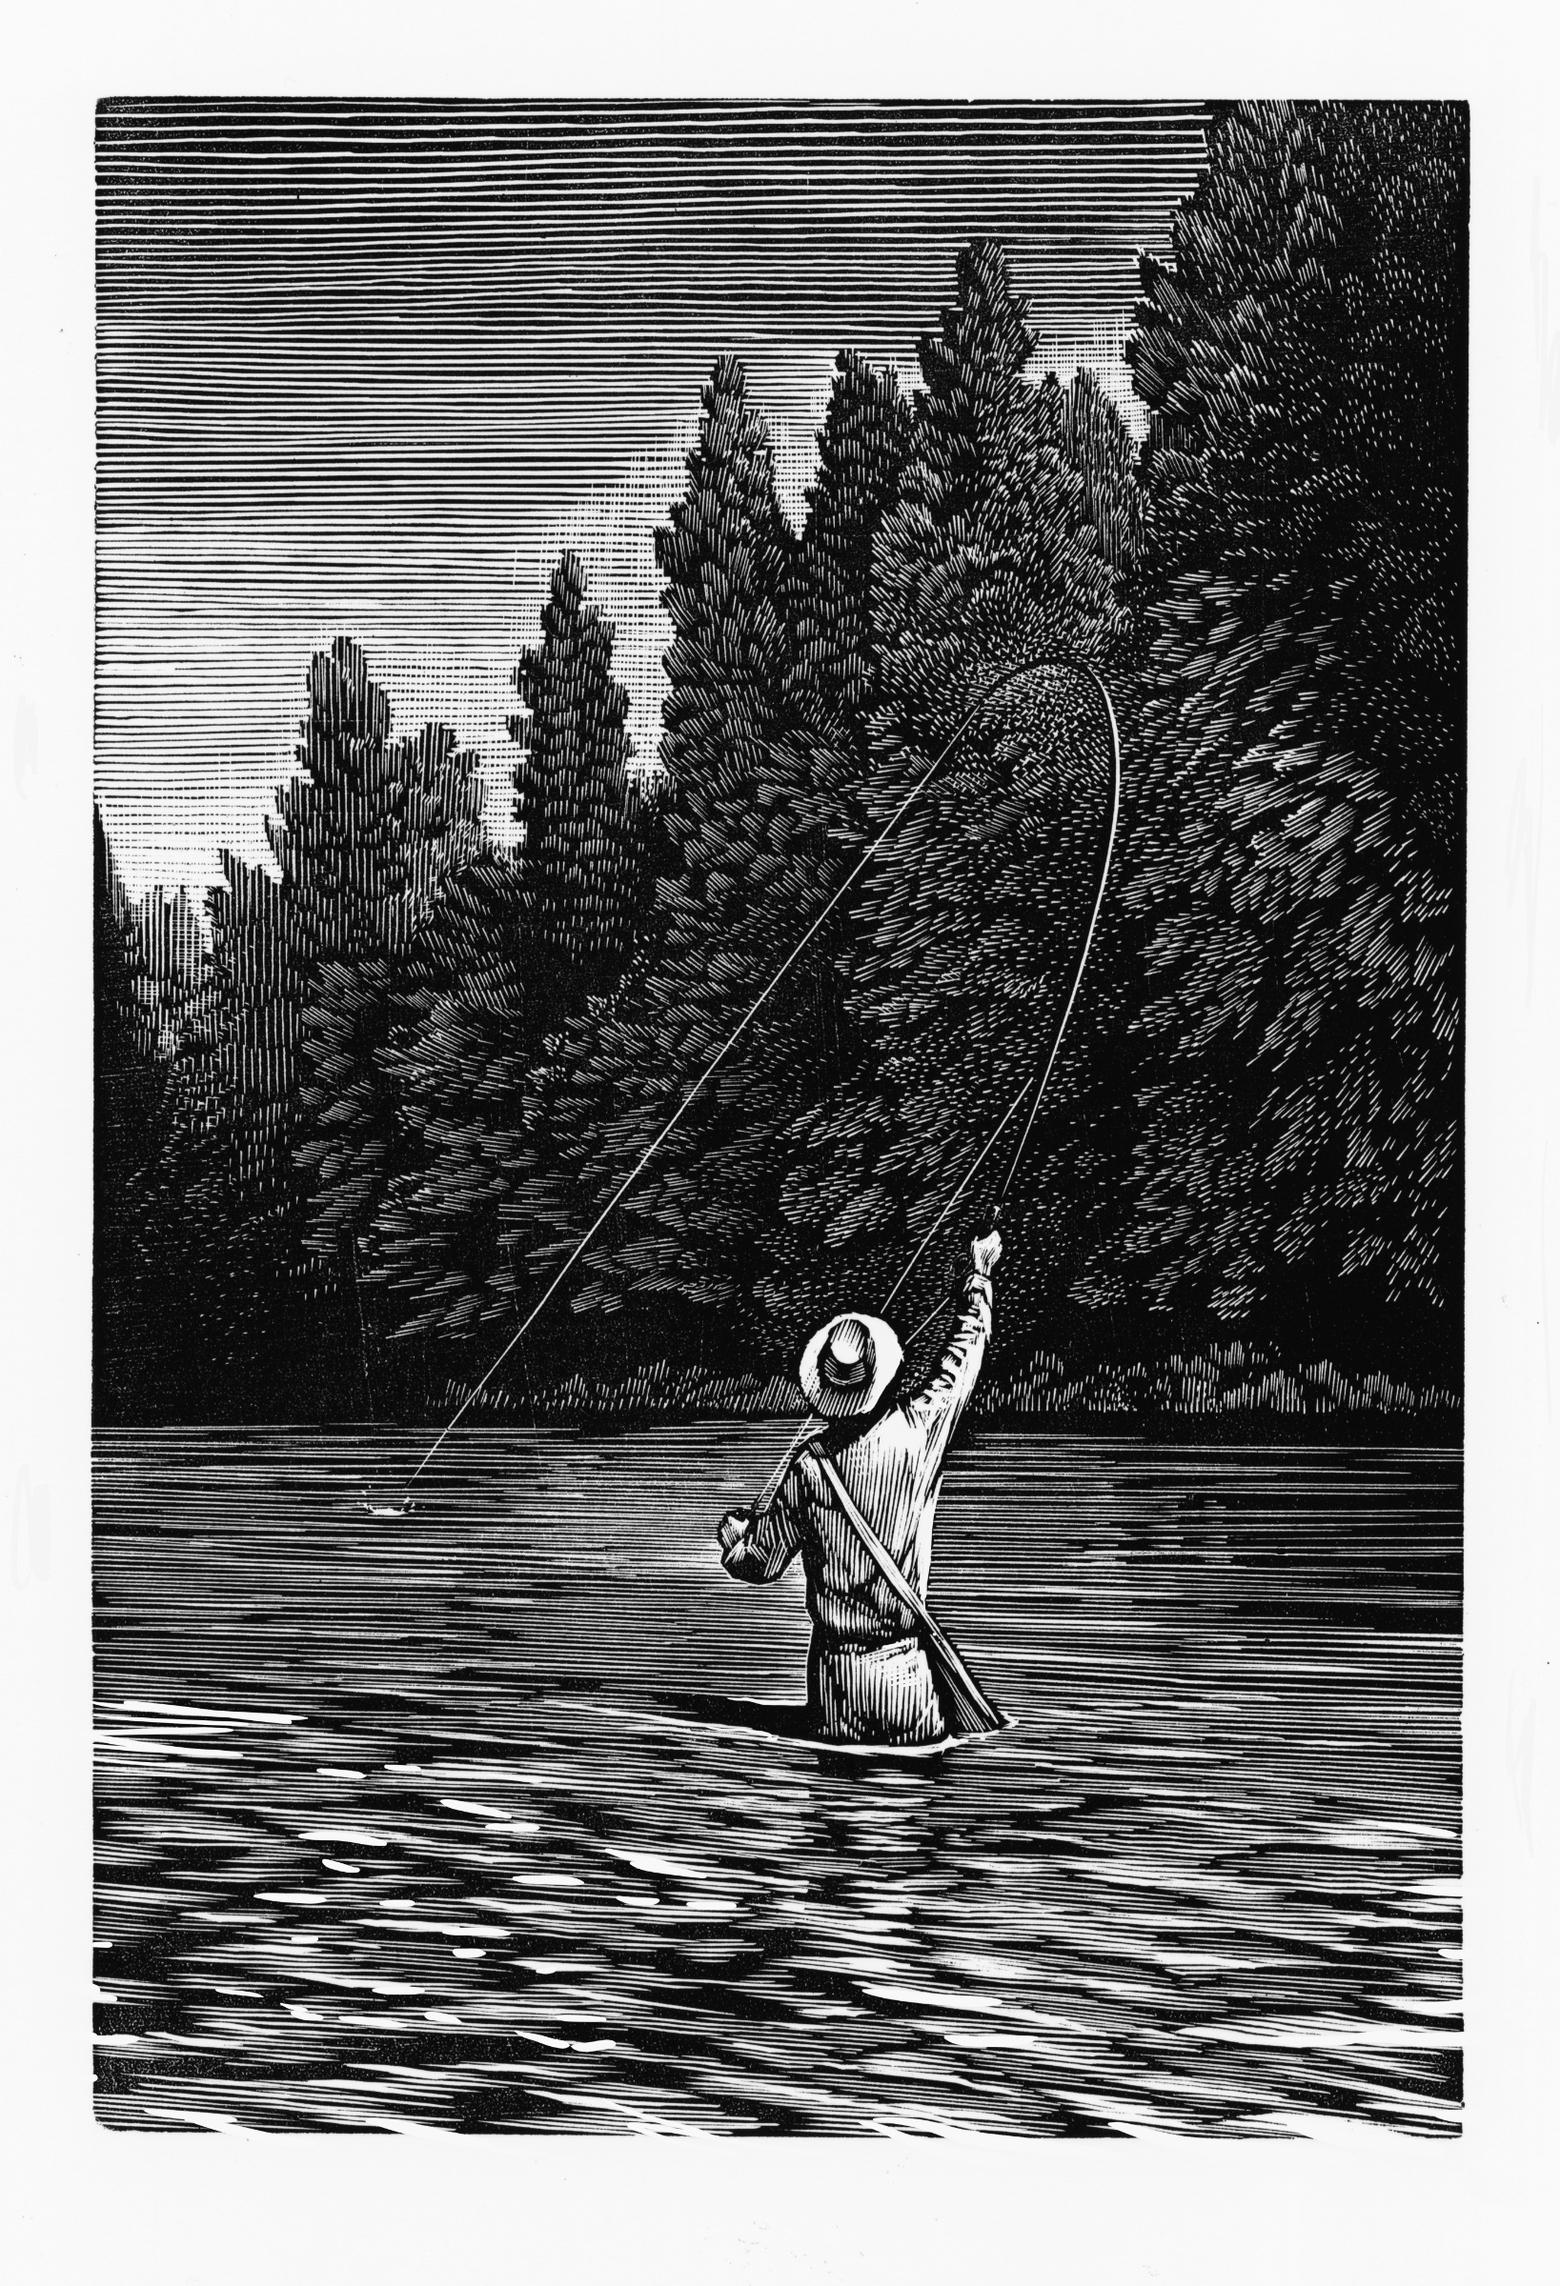 A woodcut illustration in "Big Two-Hearted River" by master engraver Chris Wormell